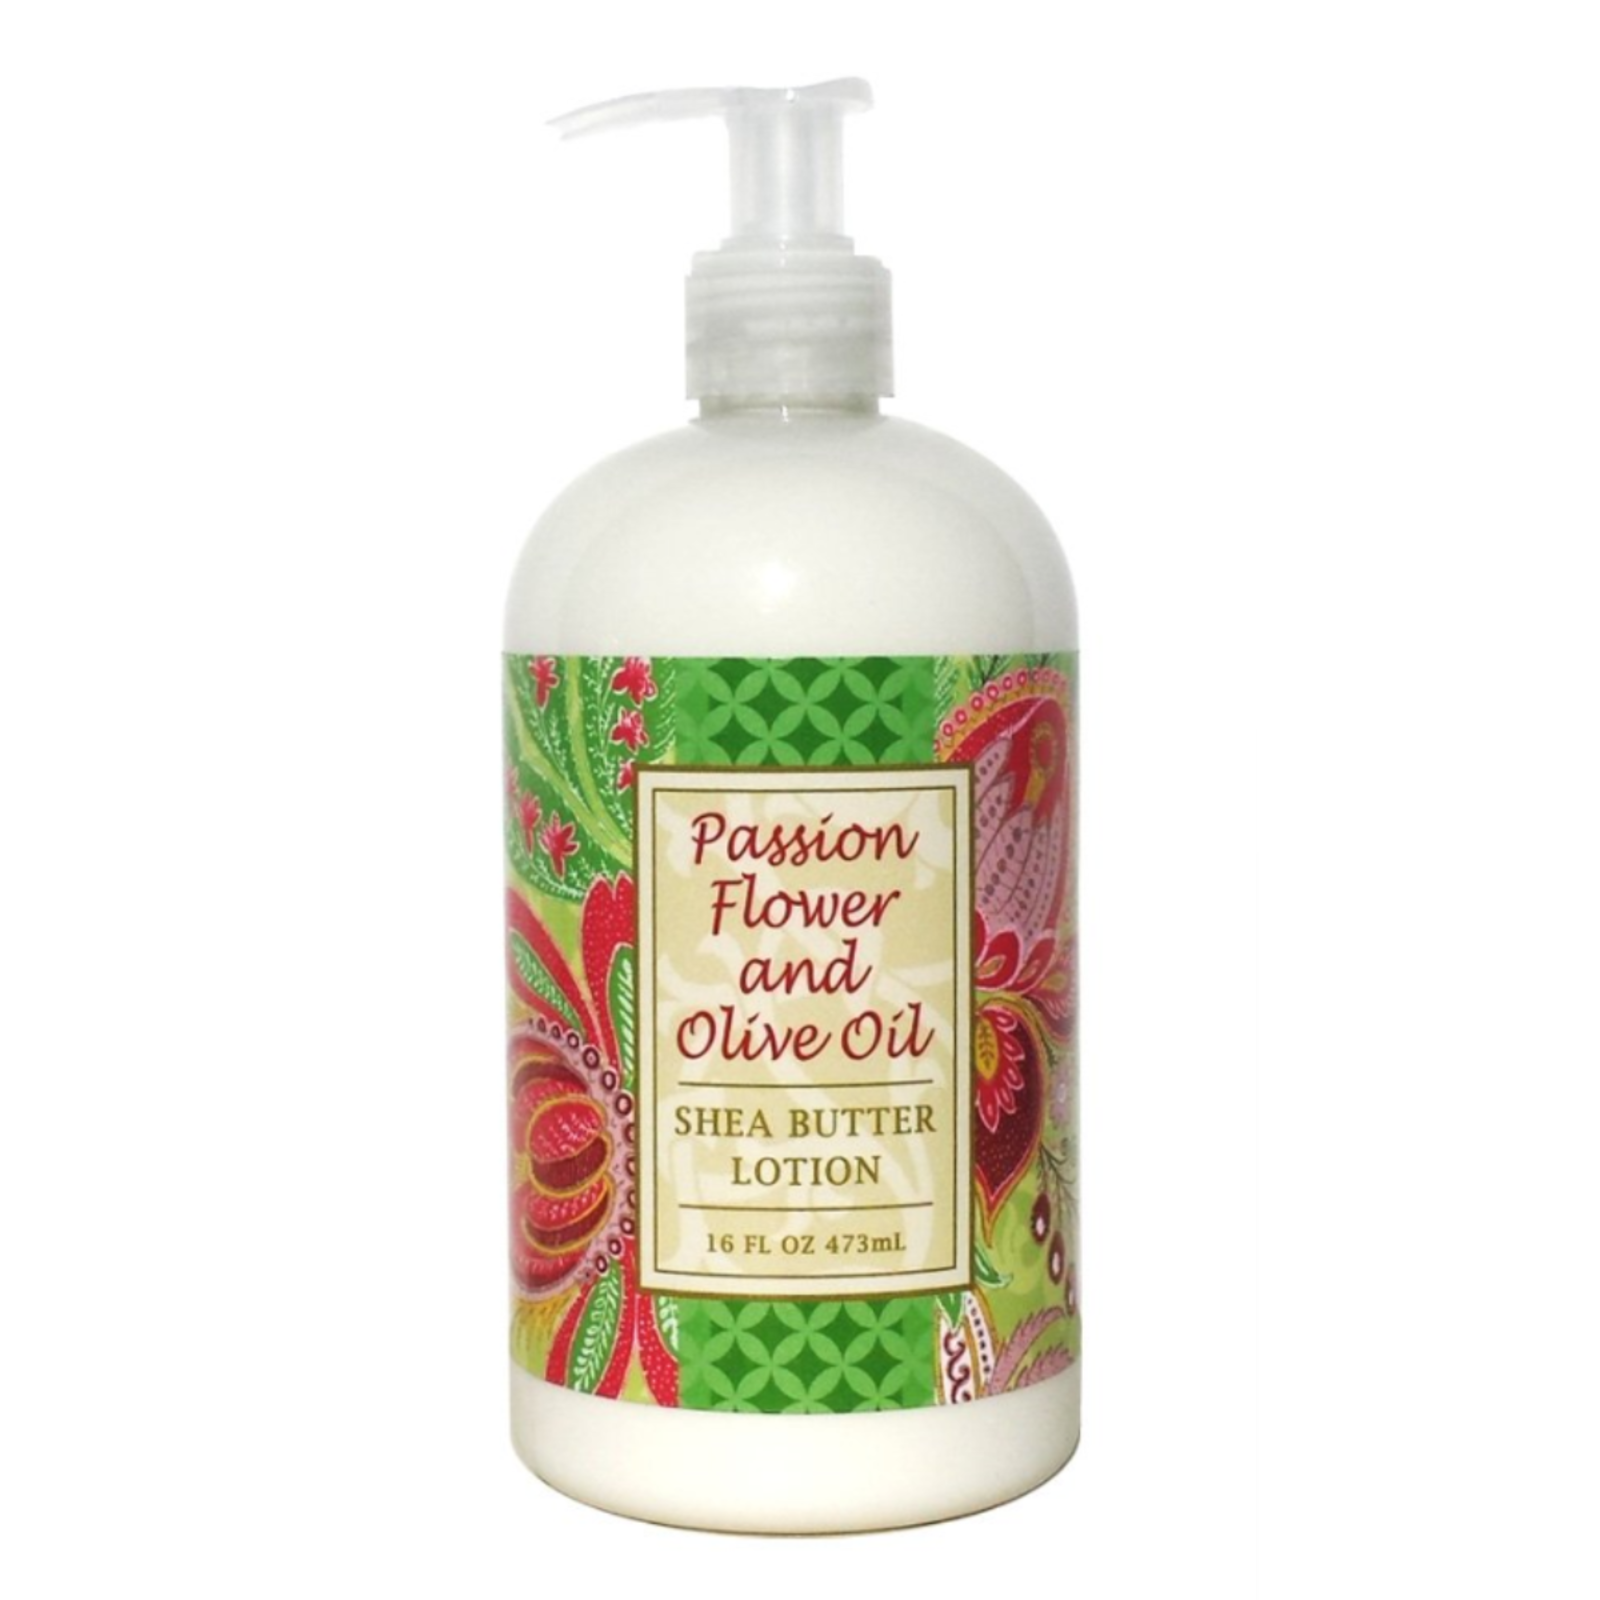 Greenwich Bay Trading Company Passion Flower Hand Lotion loading=